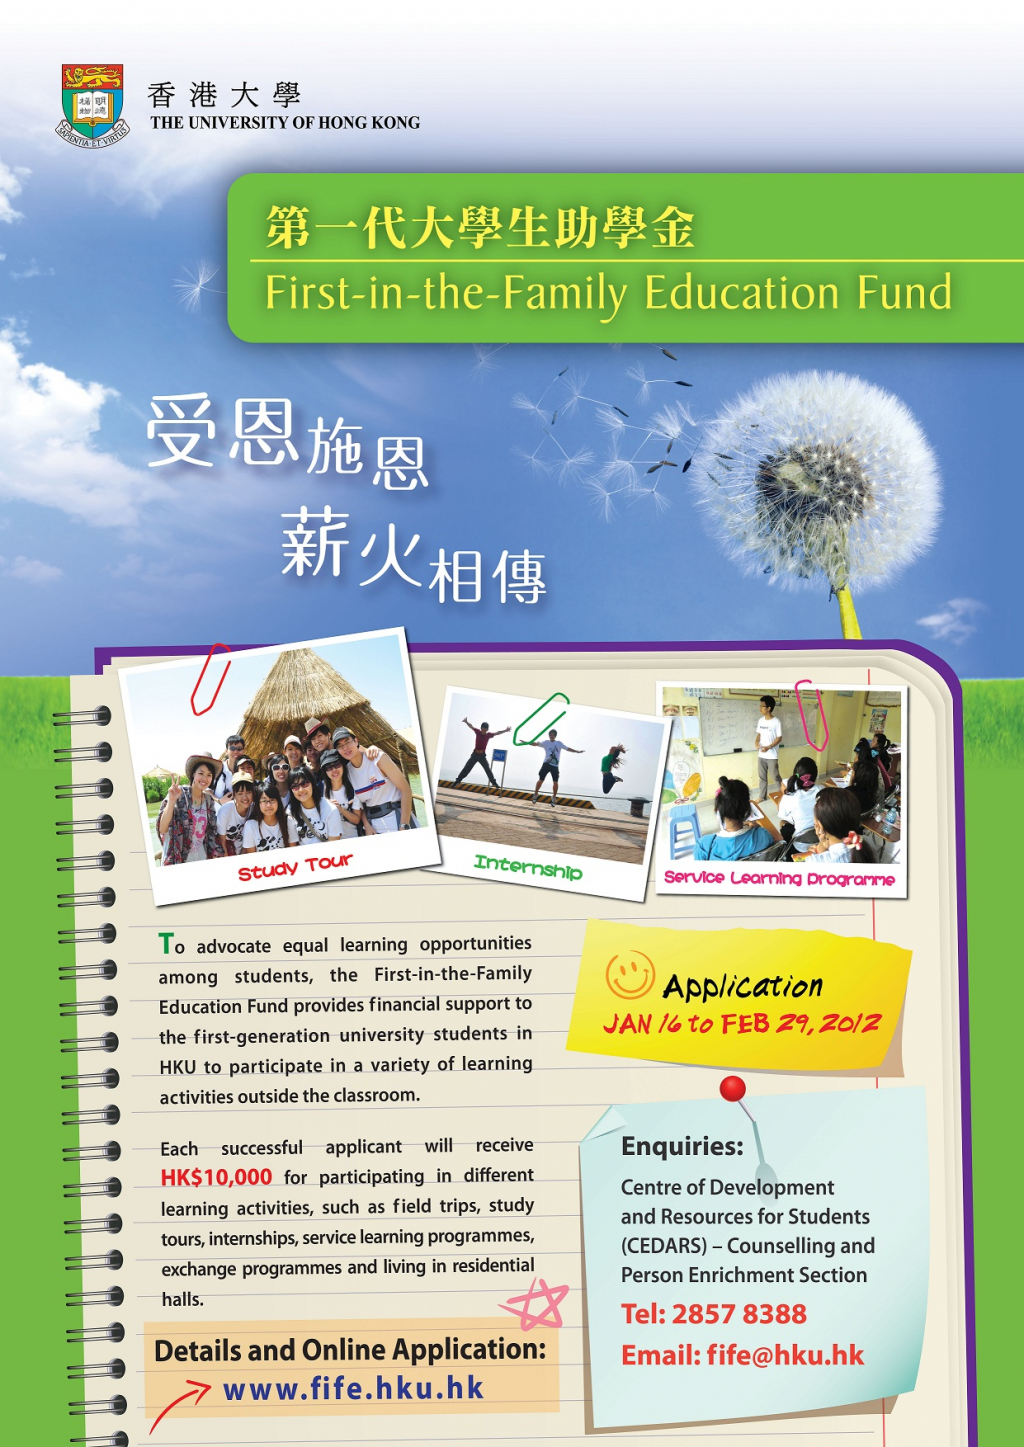 First-in-the-Family Education Fund is now open for application